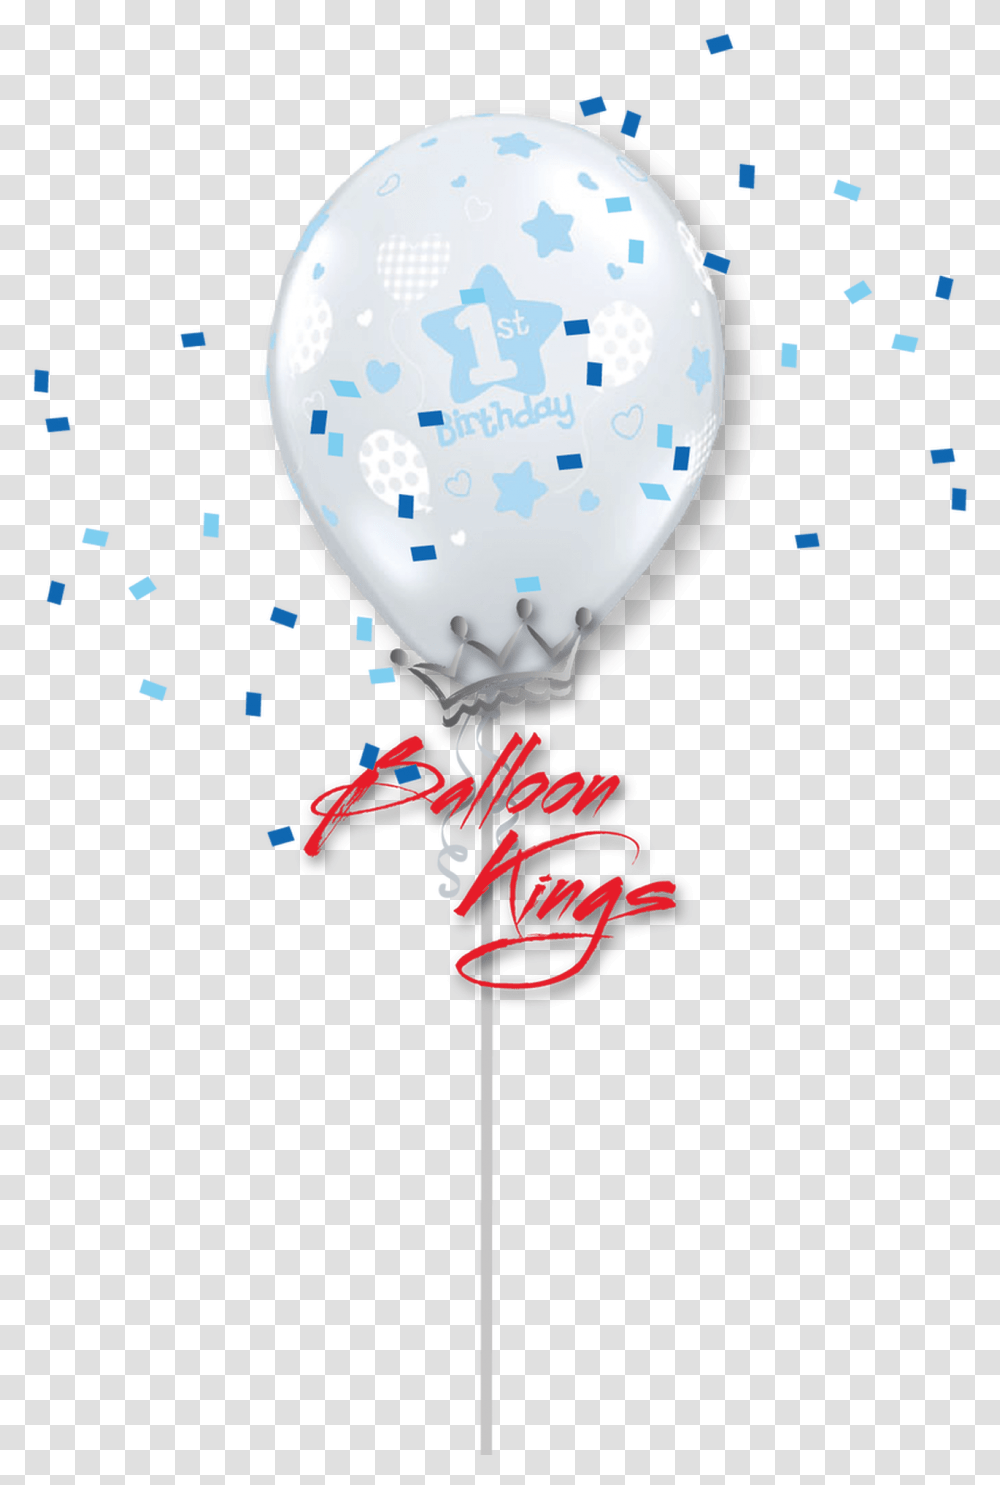 Latex First Birthday Boy Full Hd Edit Photo Background, Balloon, Paper, Confetti Transparent Png